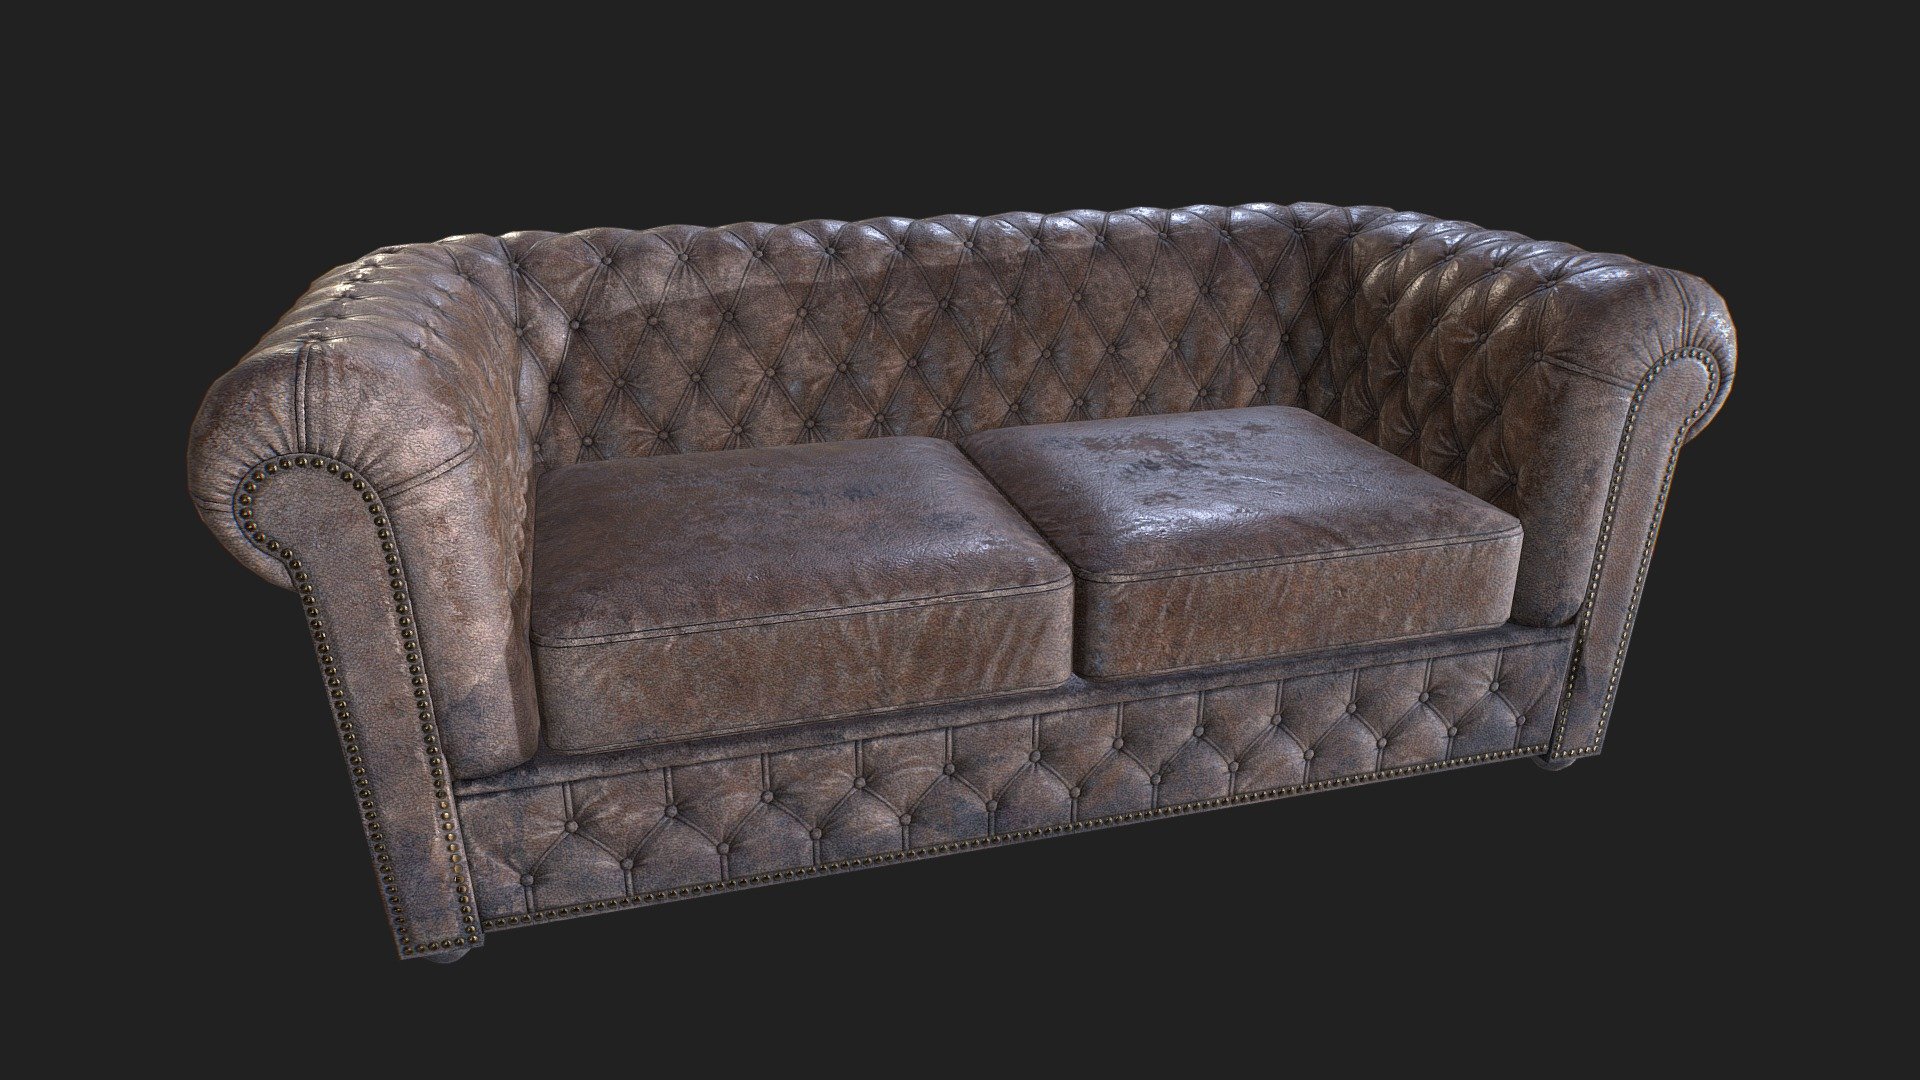 Decoration for scene.

For Pathologic game

http://www.pathologic-game.com/index.php?language=en

by Ice-Pick Lodge

http://ice-pick.com/en/ - Pathologic (2018). Old Chesterfield Sofa - 3D model by goldengrifon 3d model